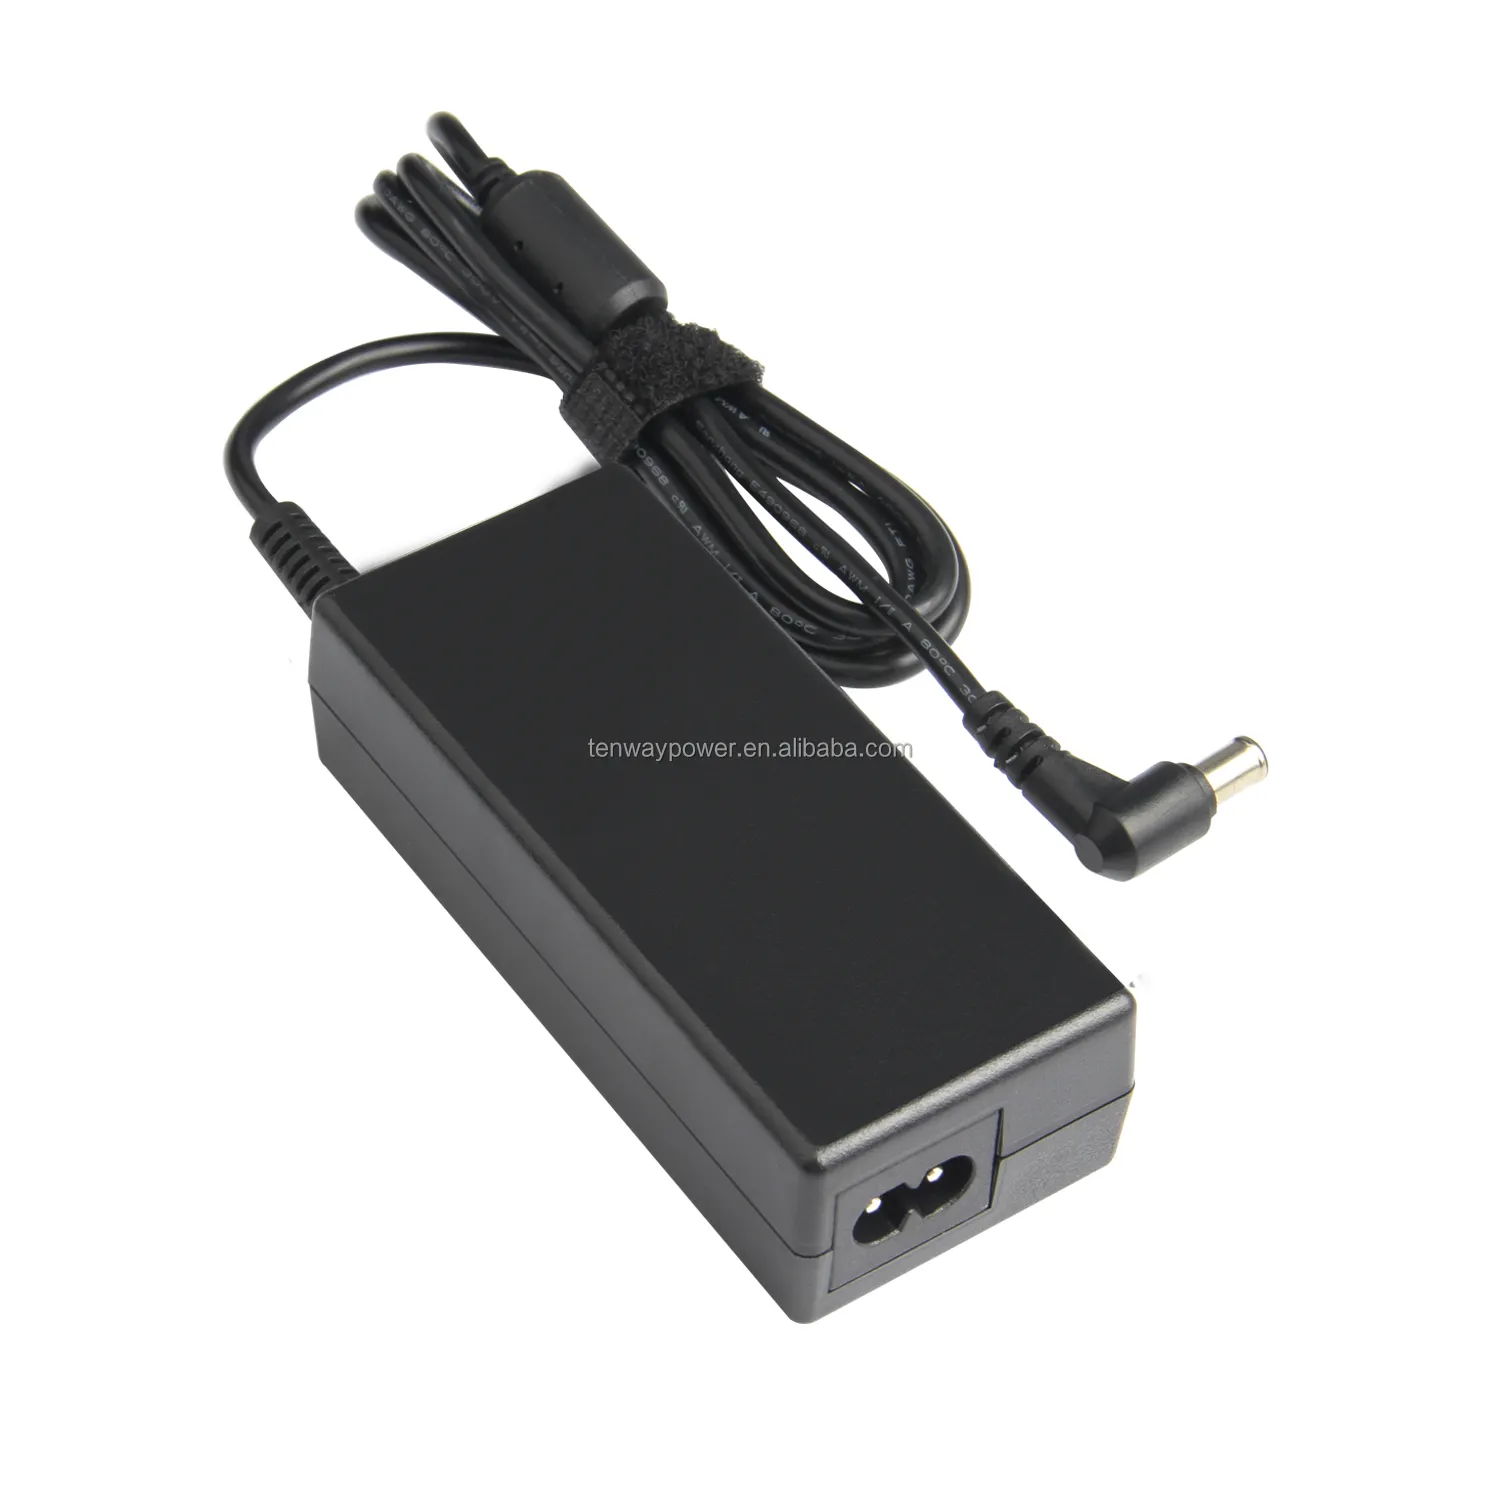 16V 4a 5.5*2.5*10Mm Laptop Ac Adapter Voor Acer Lenovo Asus Delta Toshiba Laptops